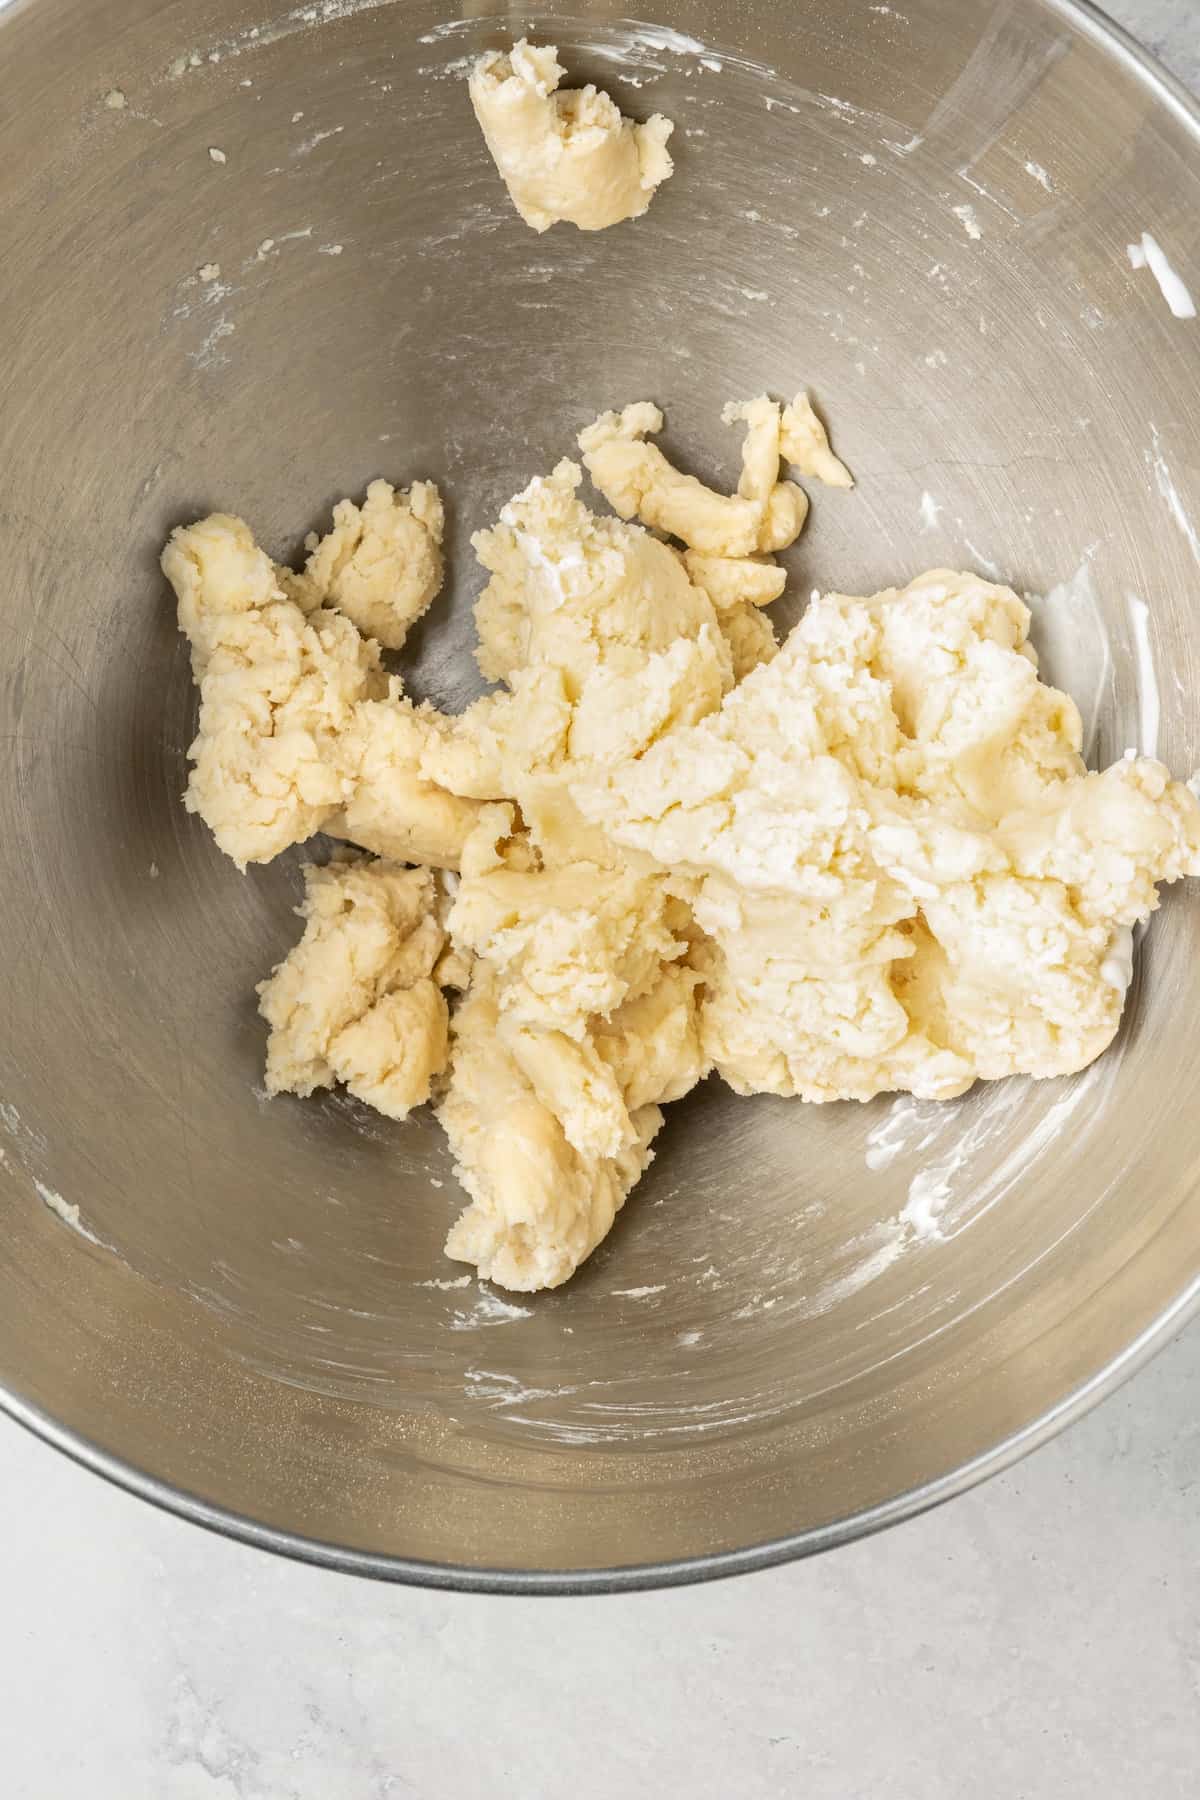 Gluten free pizza dough in the bottom of a metal mixing bowl.